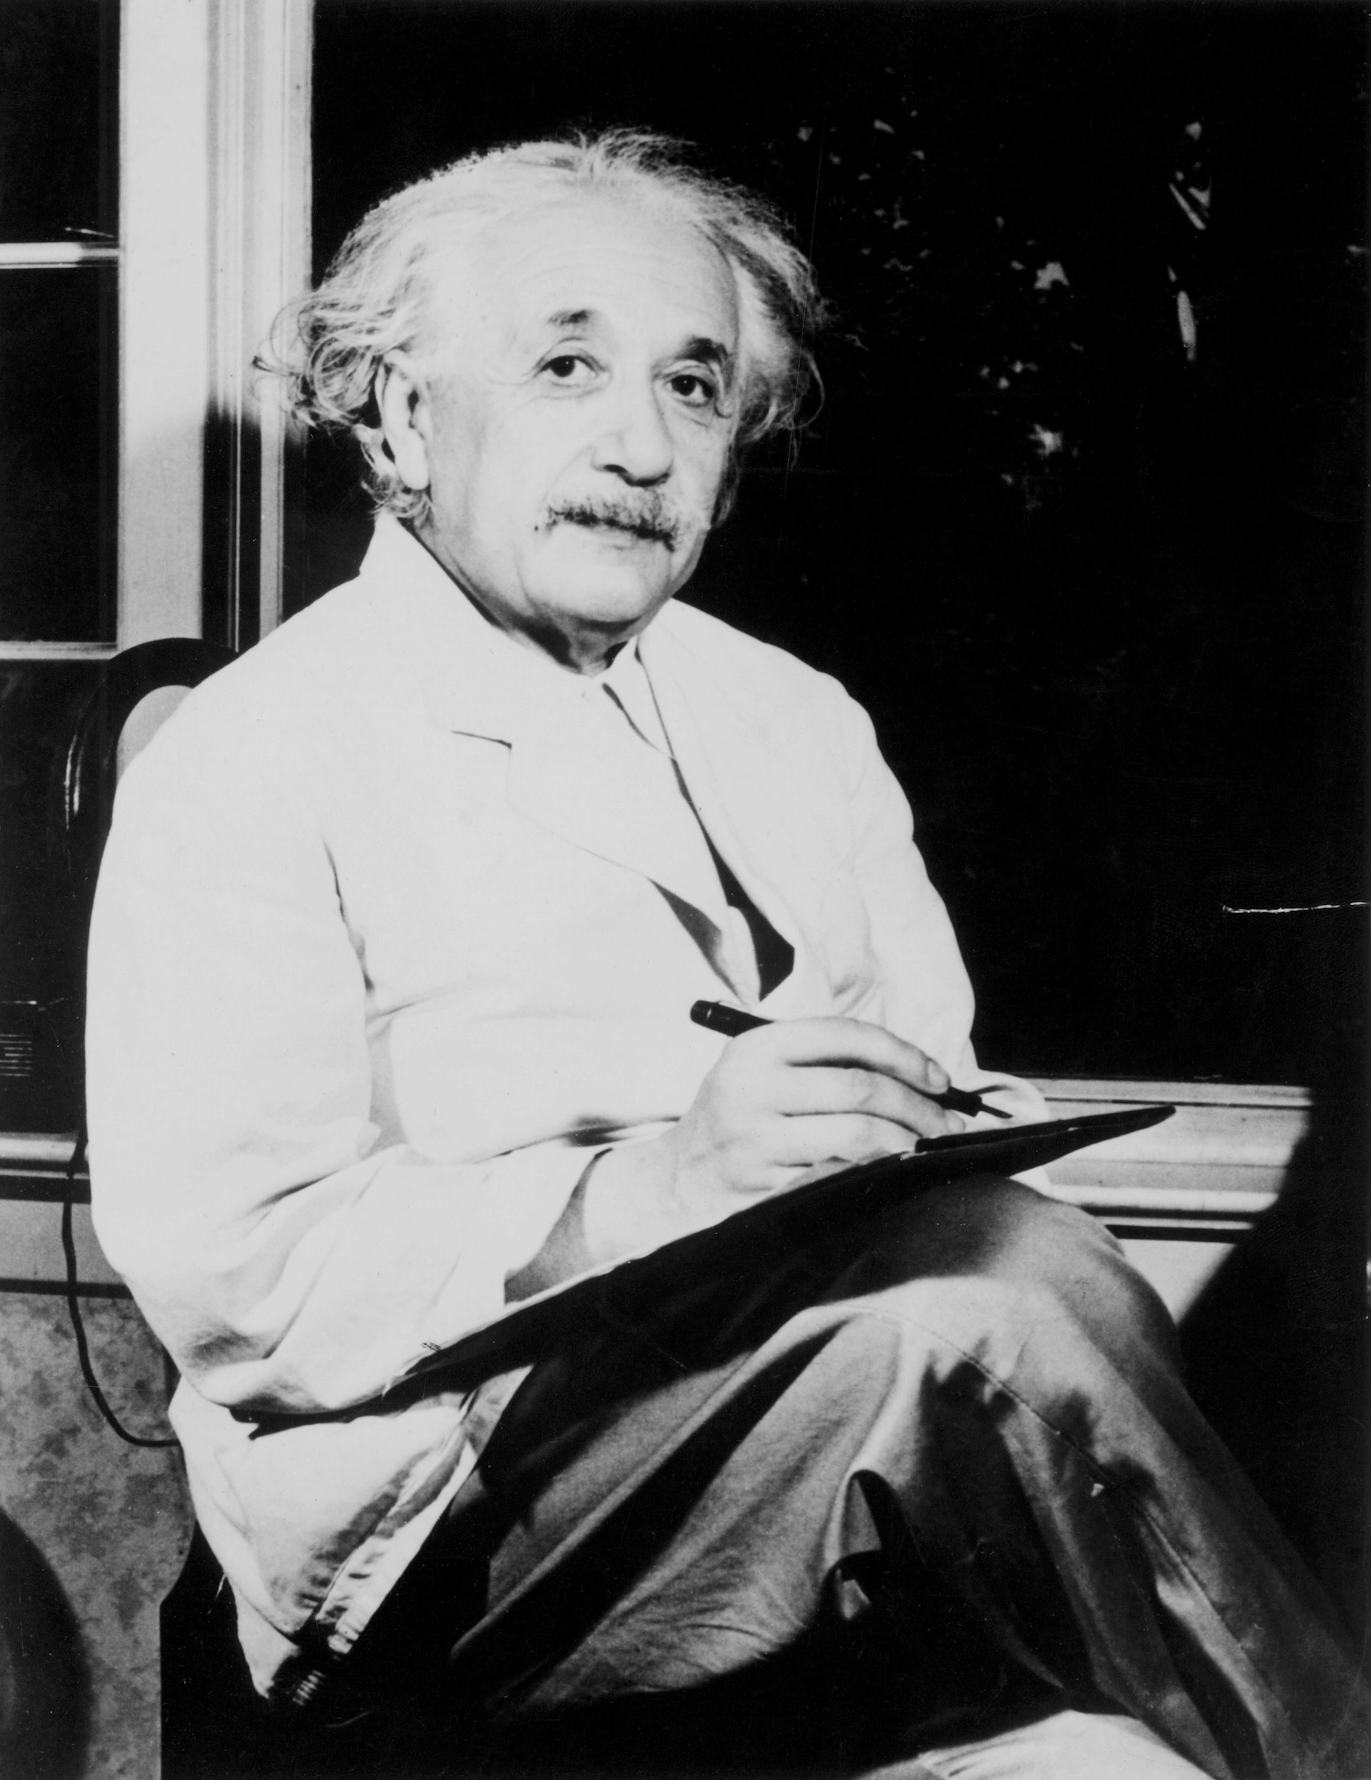 A major Einstein theory was just proven right, 106 years later